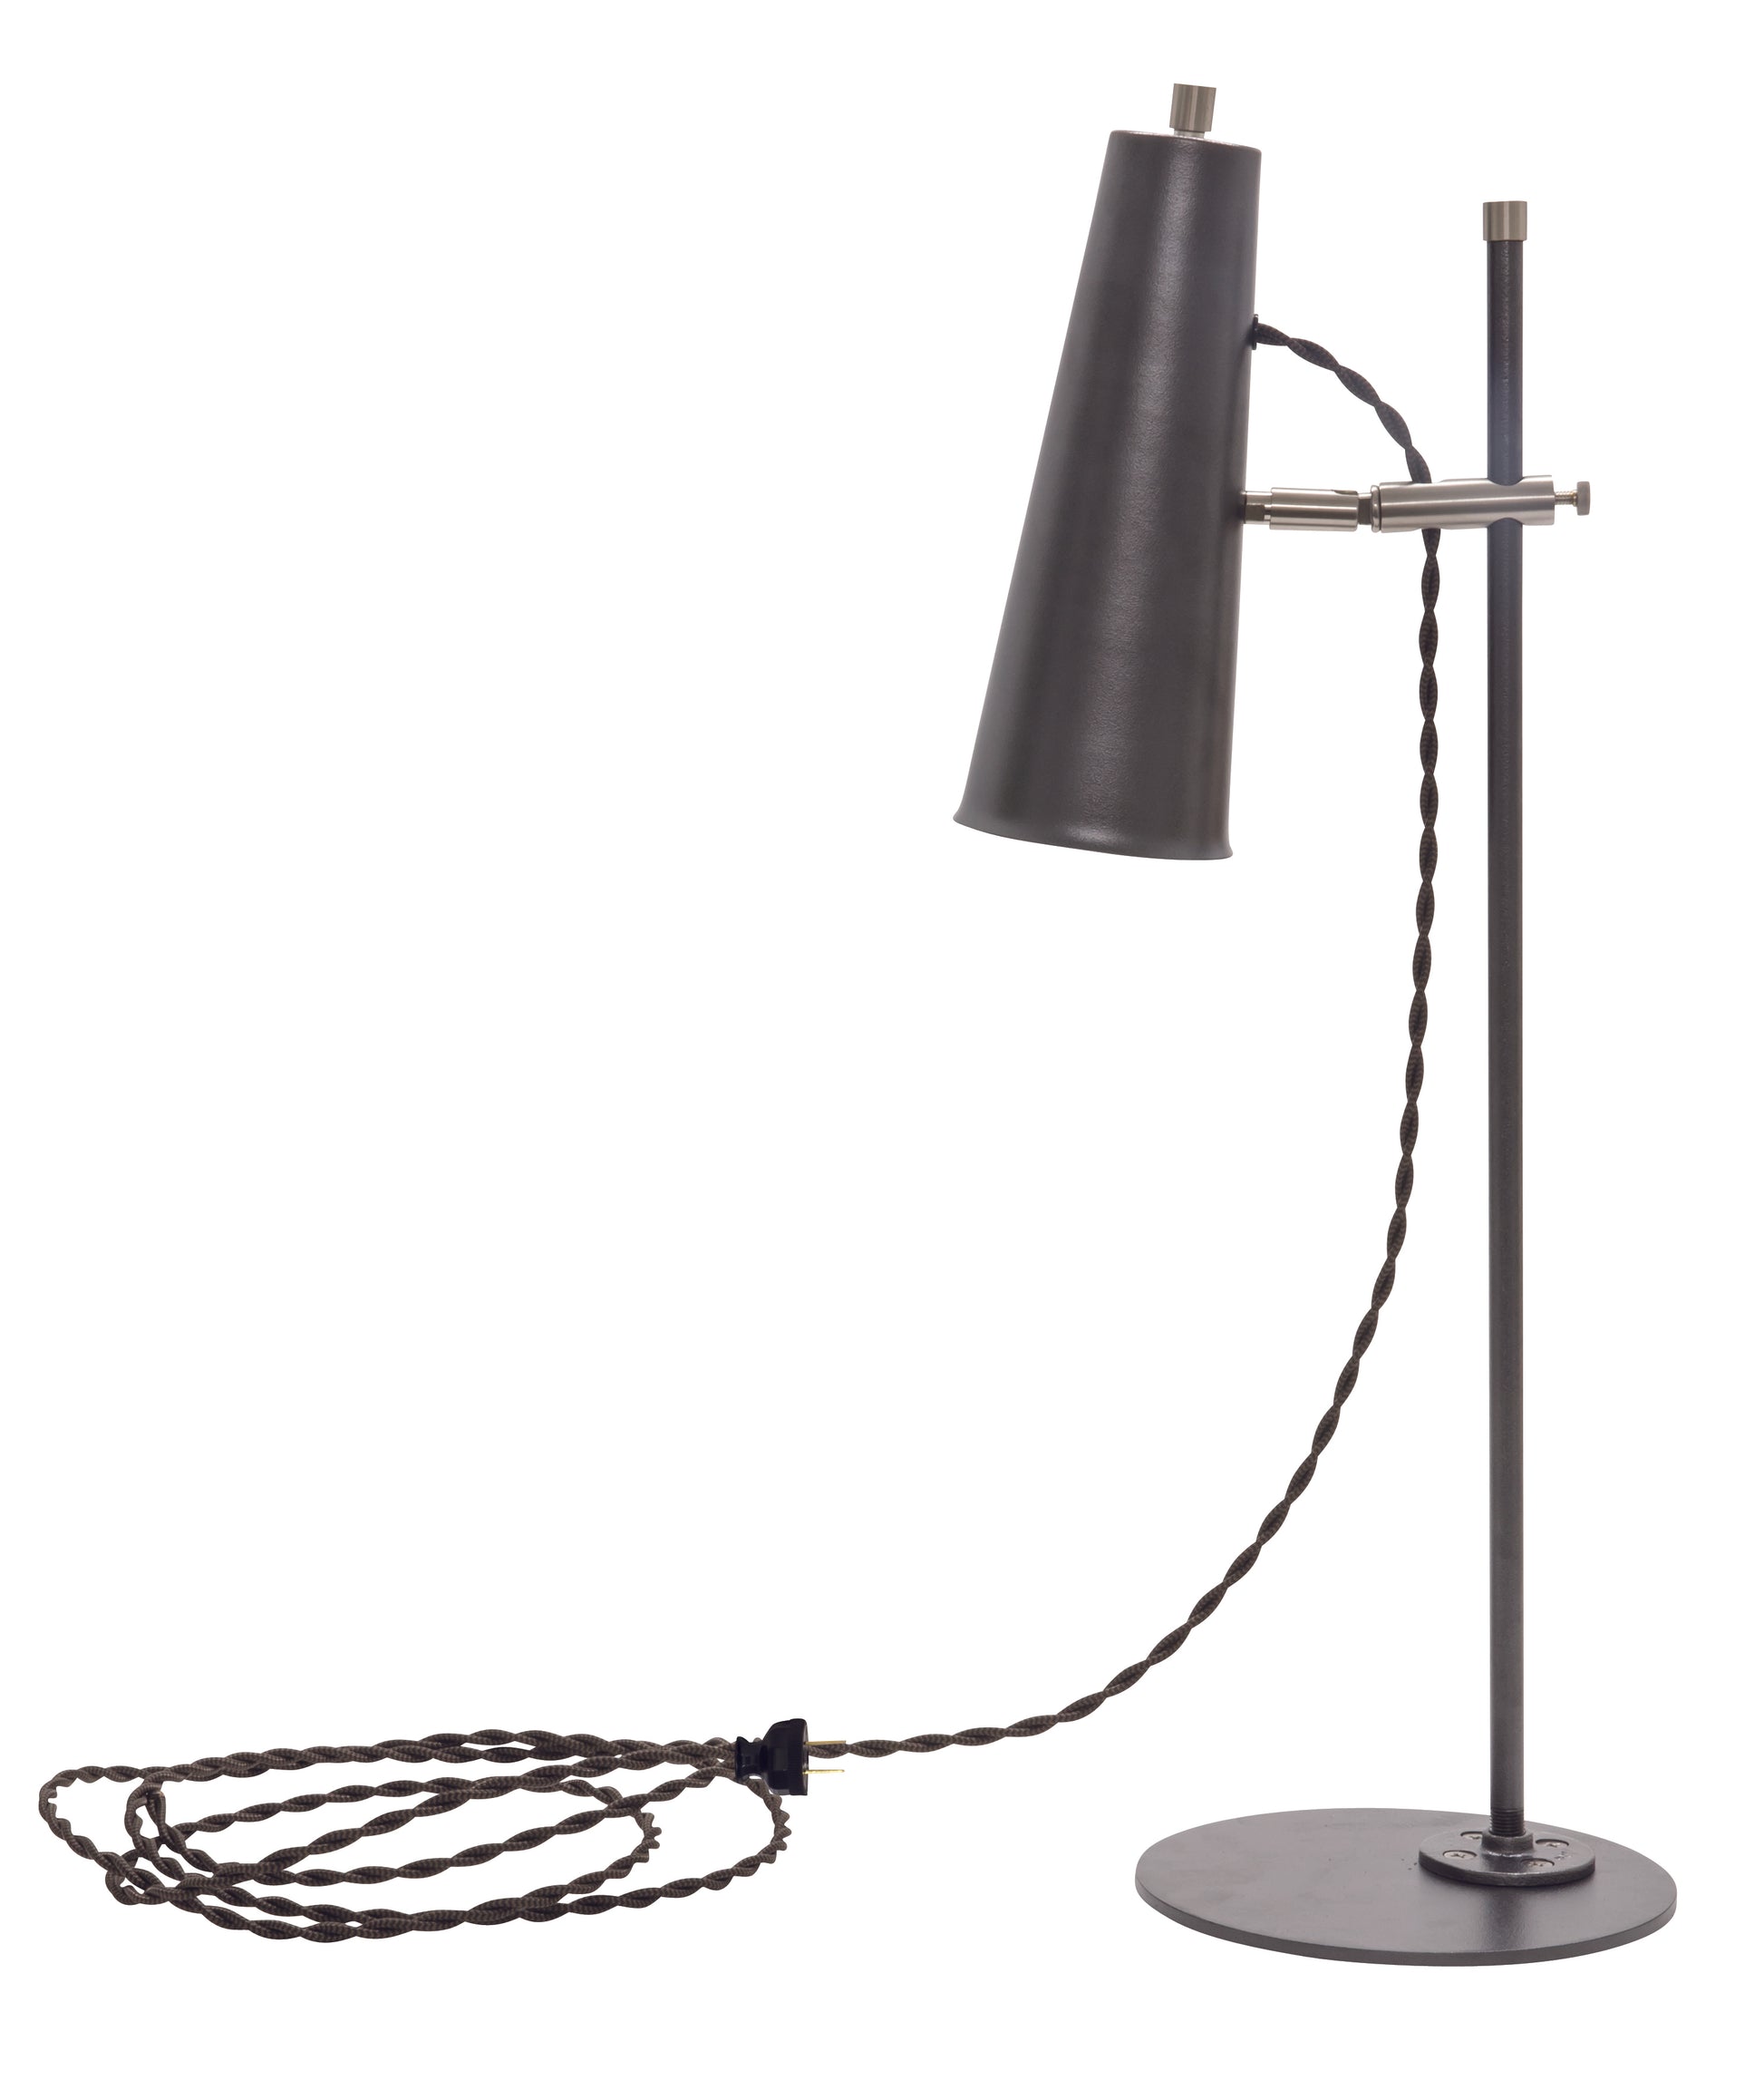 House of Troy Norton Adjustable LED Table Lamp in Granite with Satin Nickel Accents NOR350-GTSN